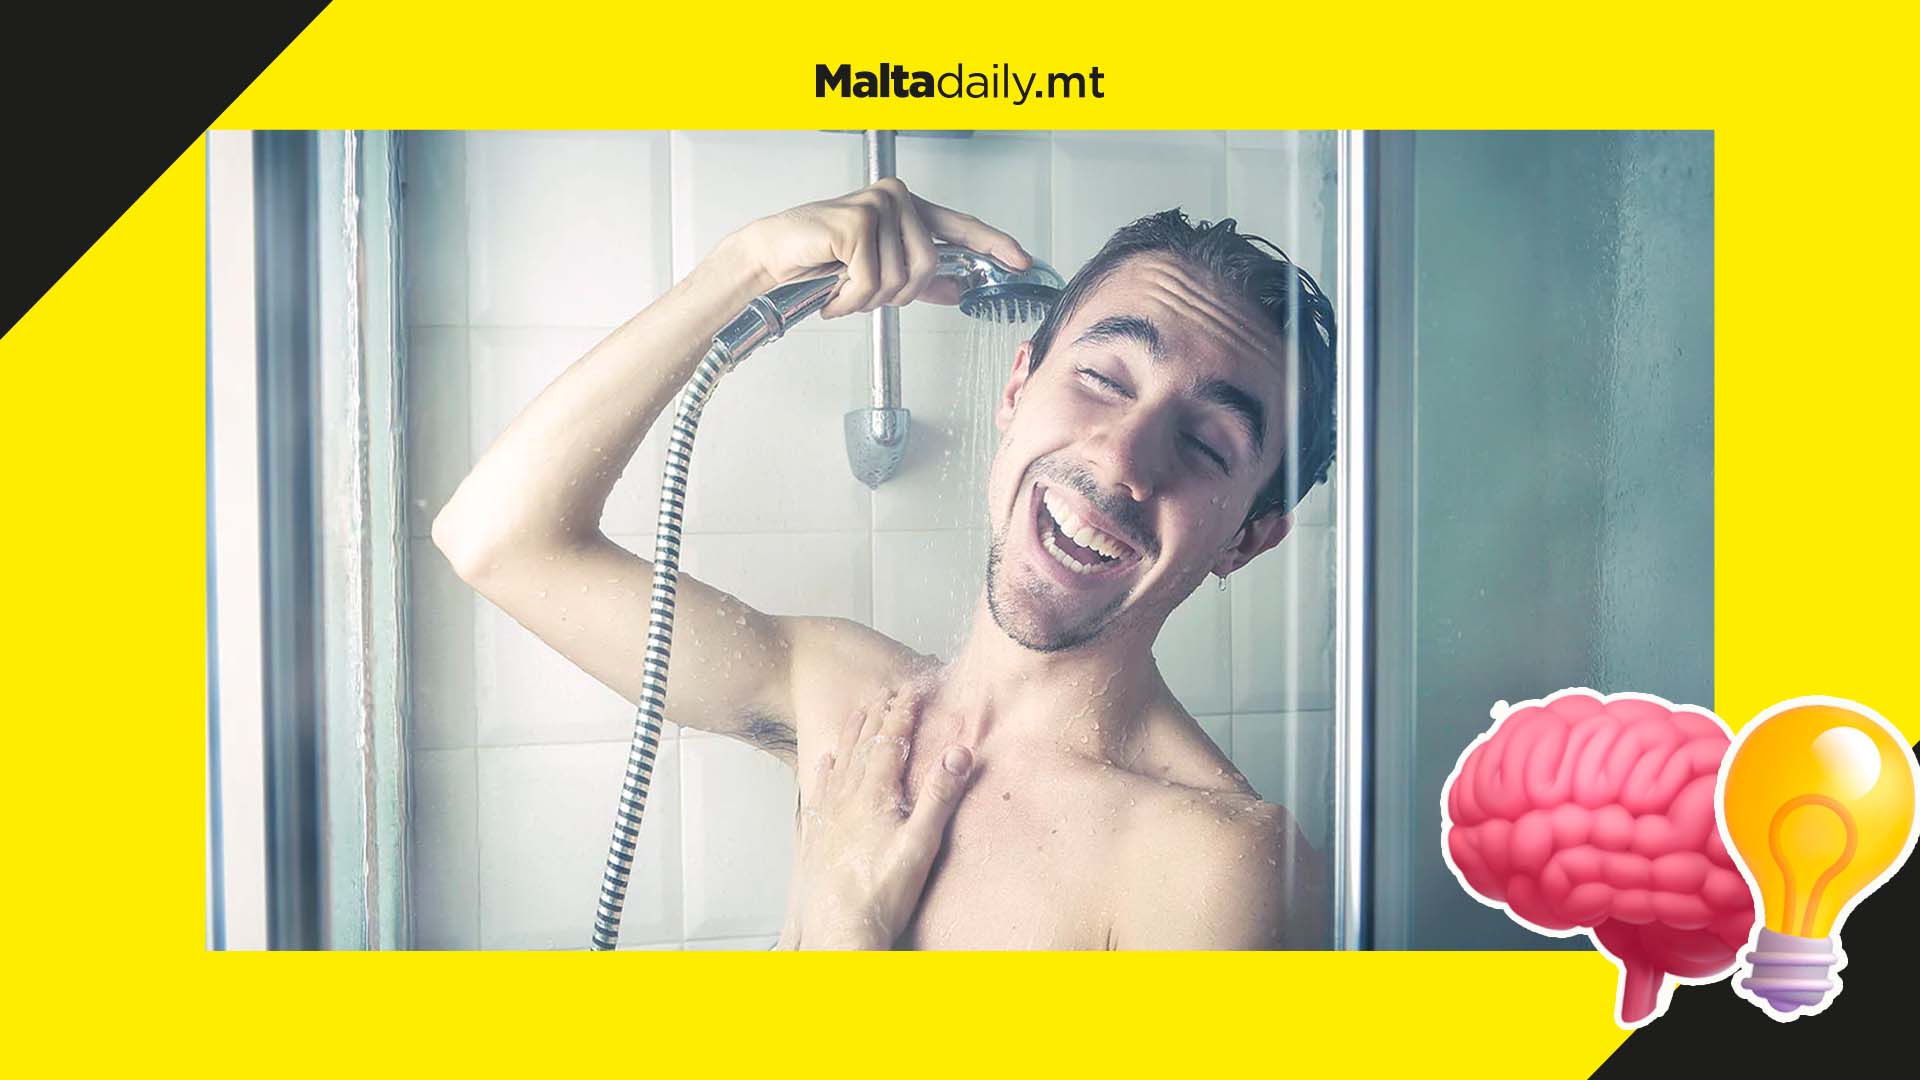 Why your best ideas come to you in the shower according to scientists